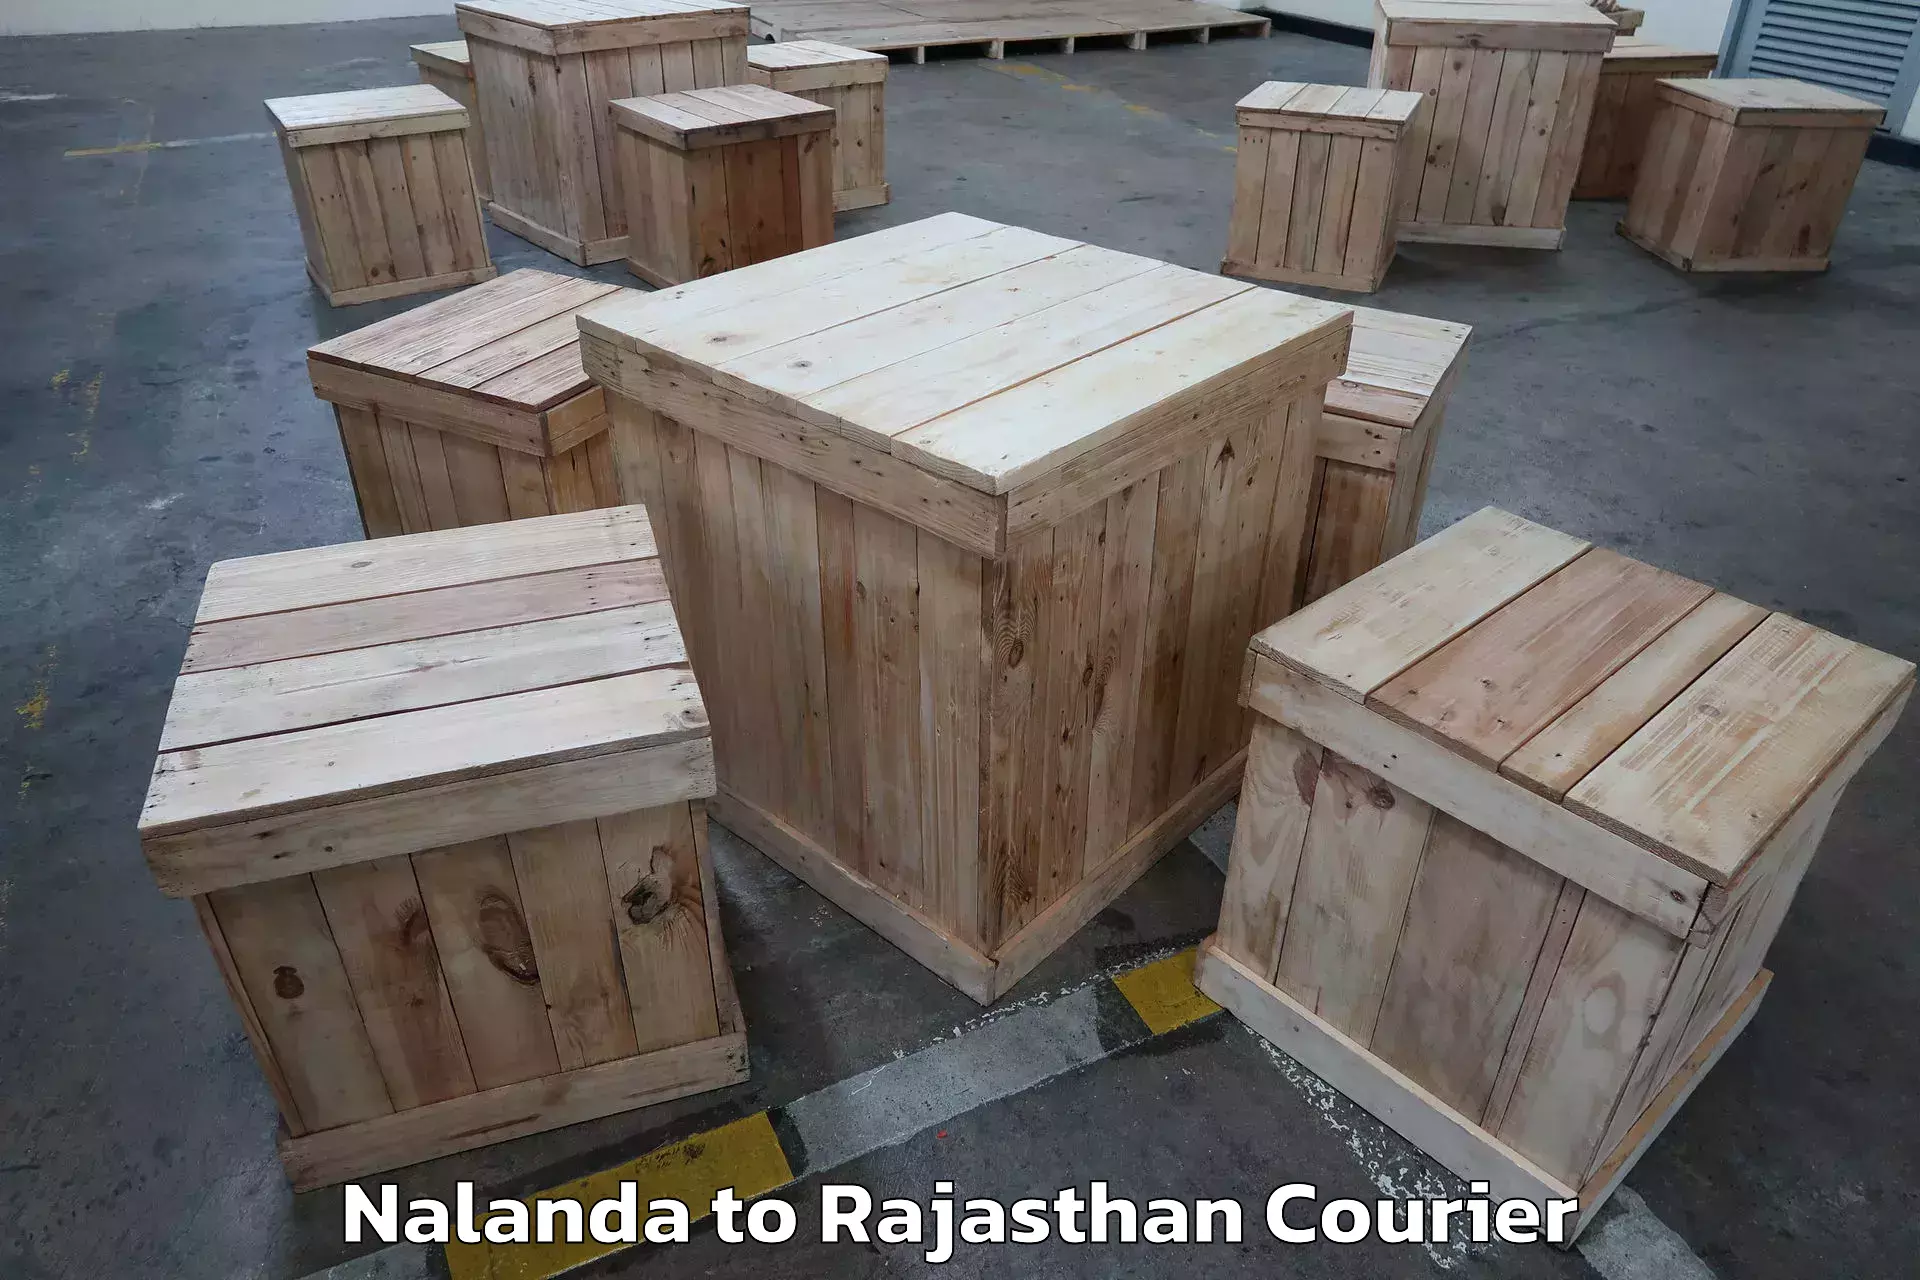 Skilled movers in Nalanda to Dholpur